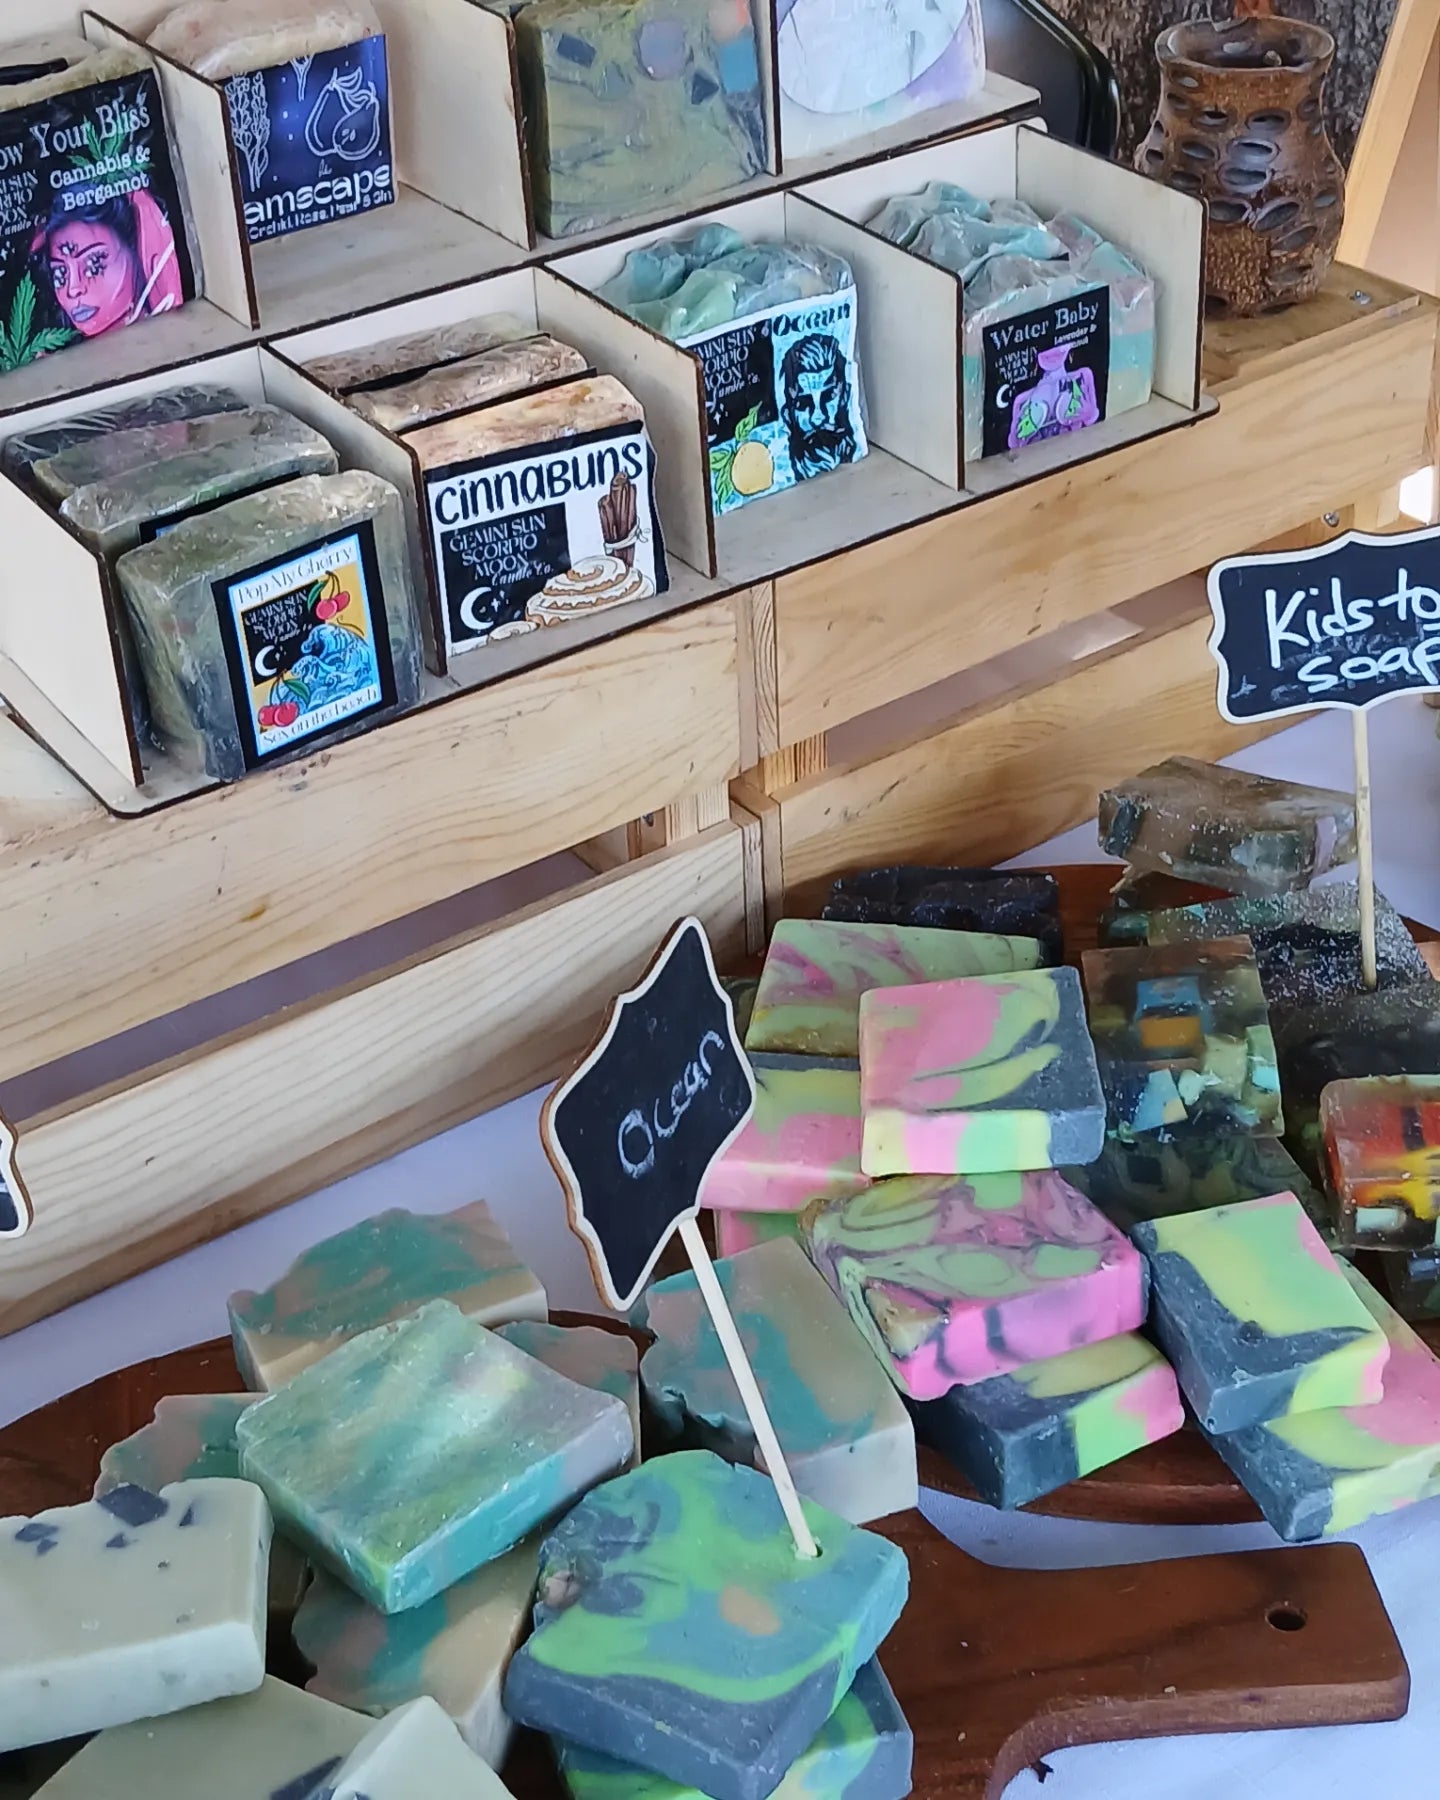 Luxe soap bars with shea butter